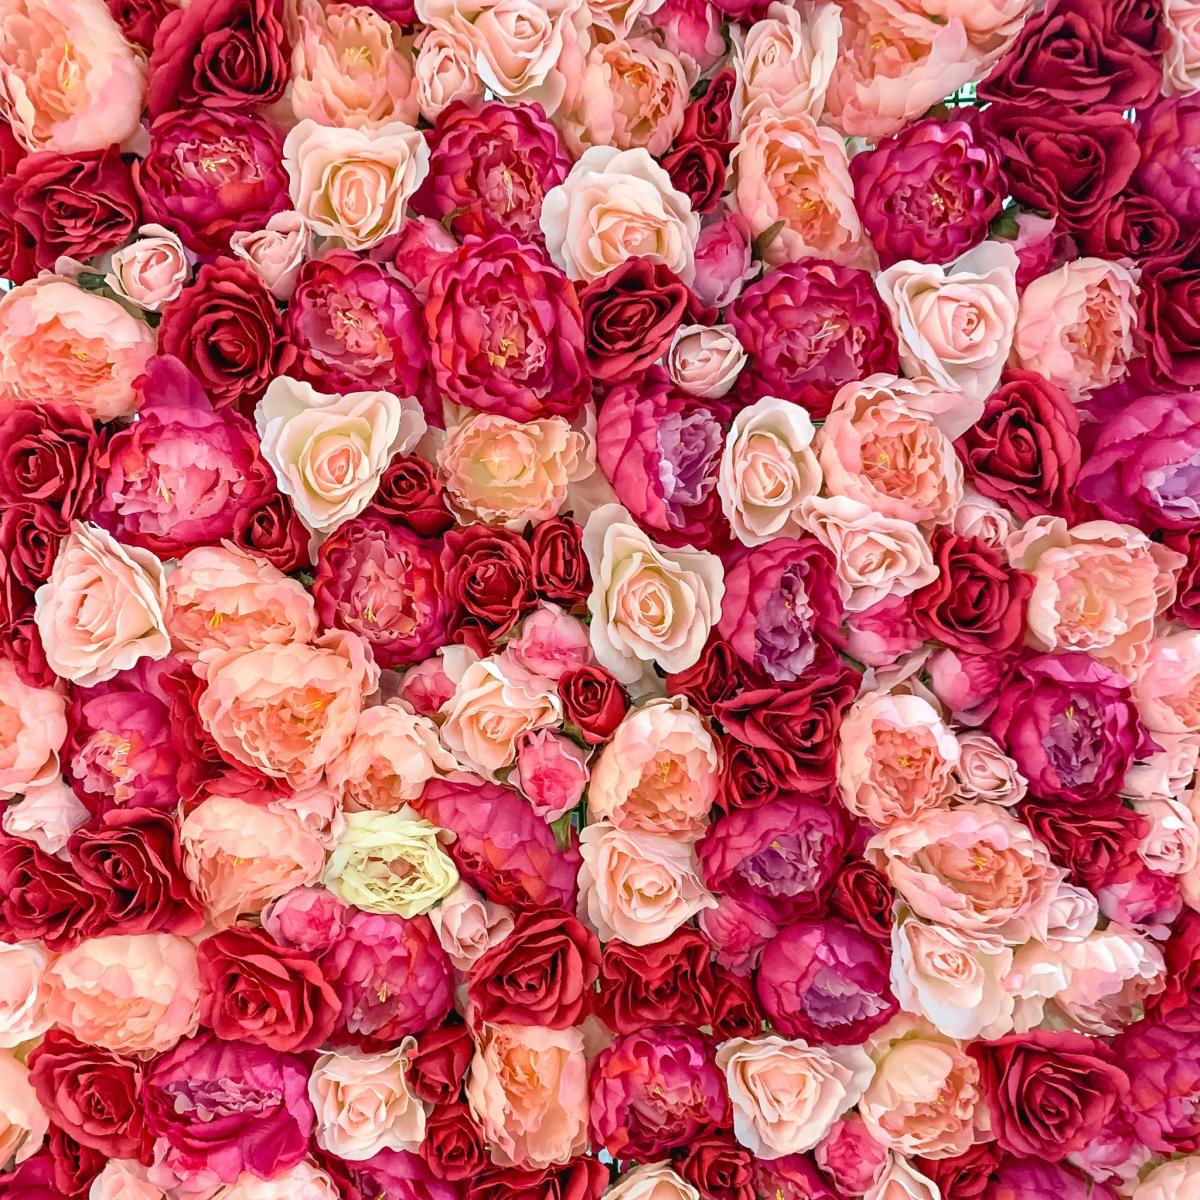 The dreamiest iphone wallpapers for valentines day that fit any aesthetic